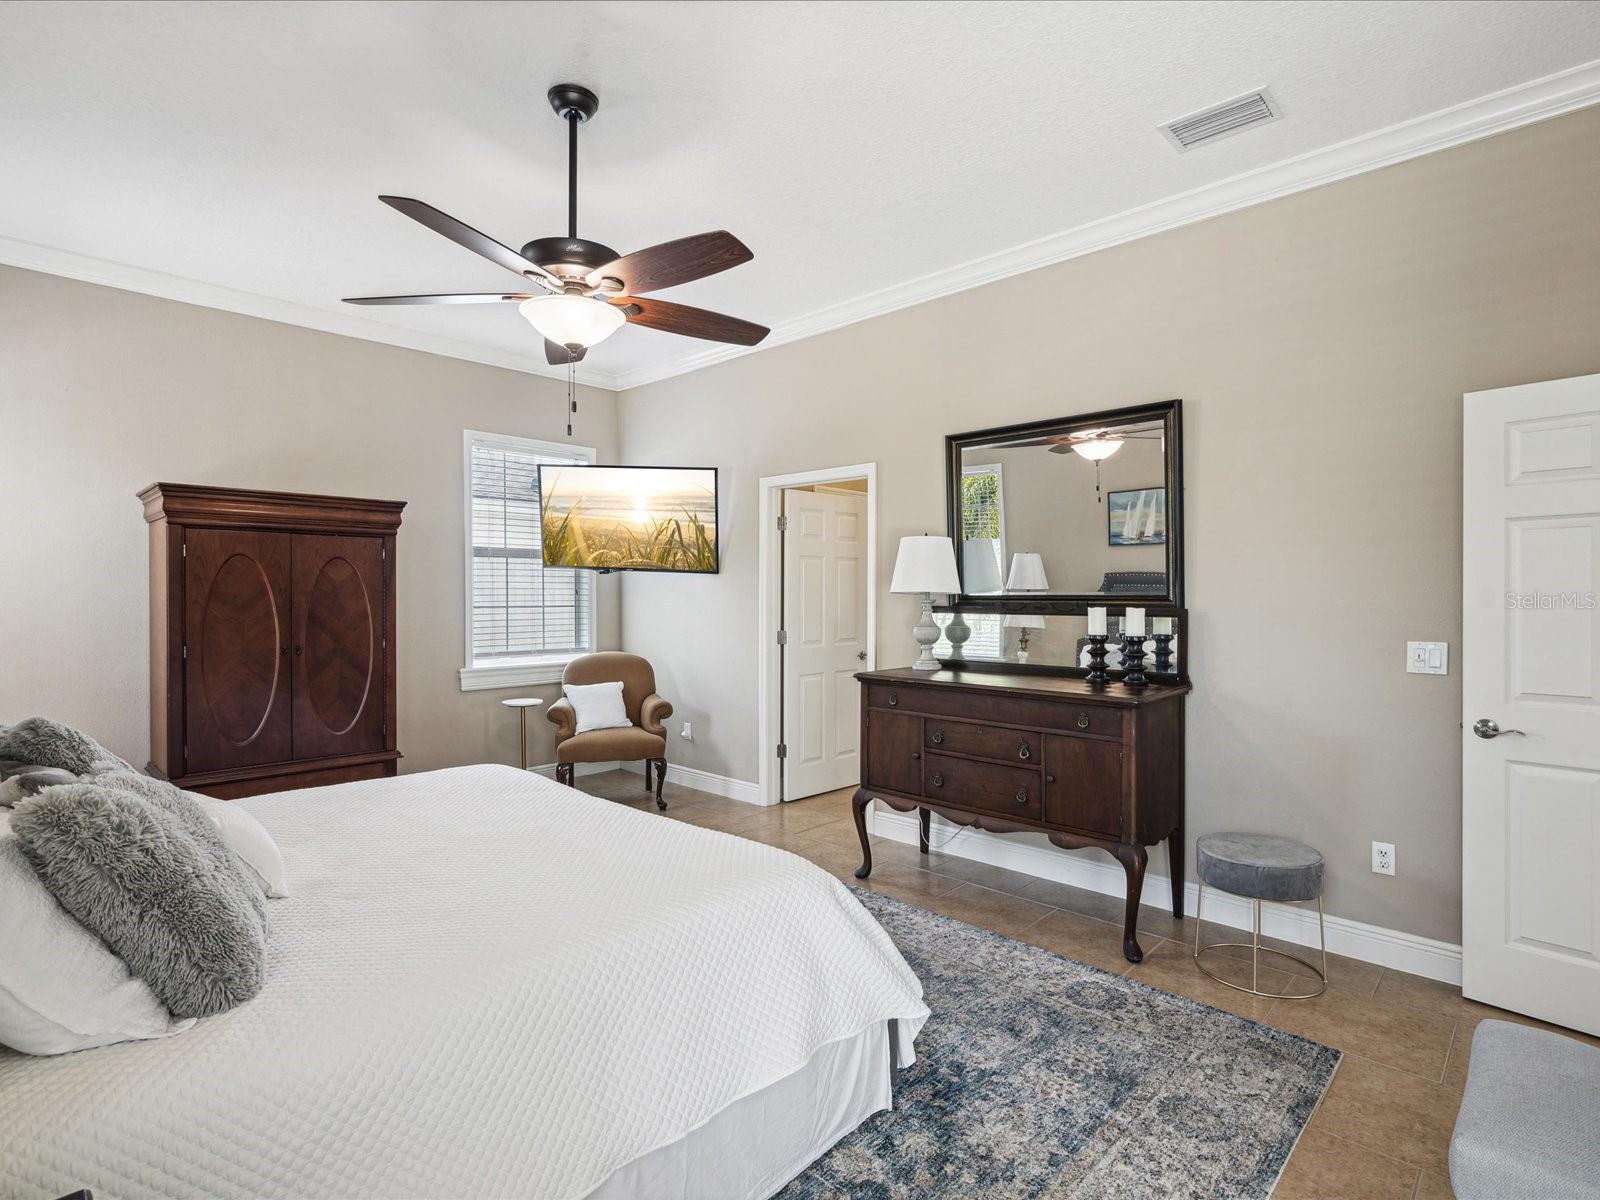 This bedroom features a ceiling fan with light, pull down window shades, and tile floors.